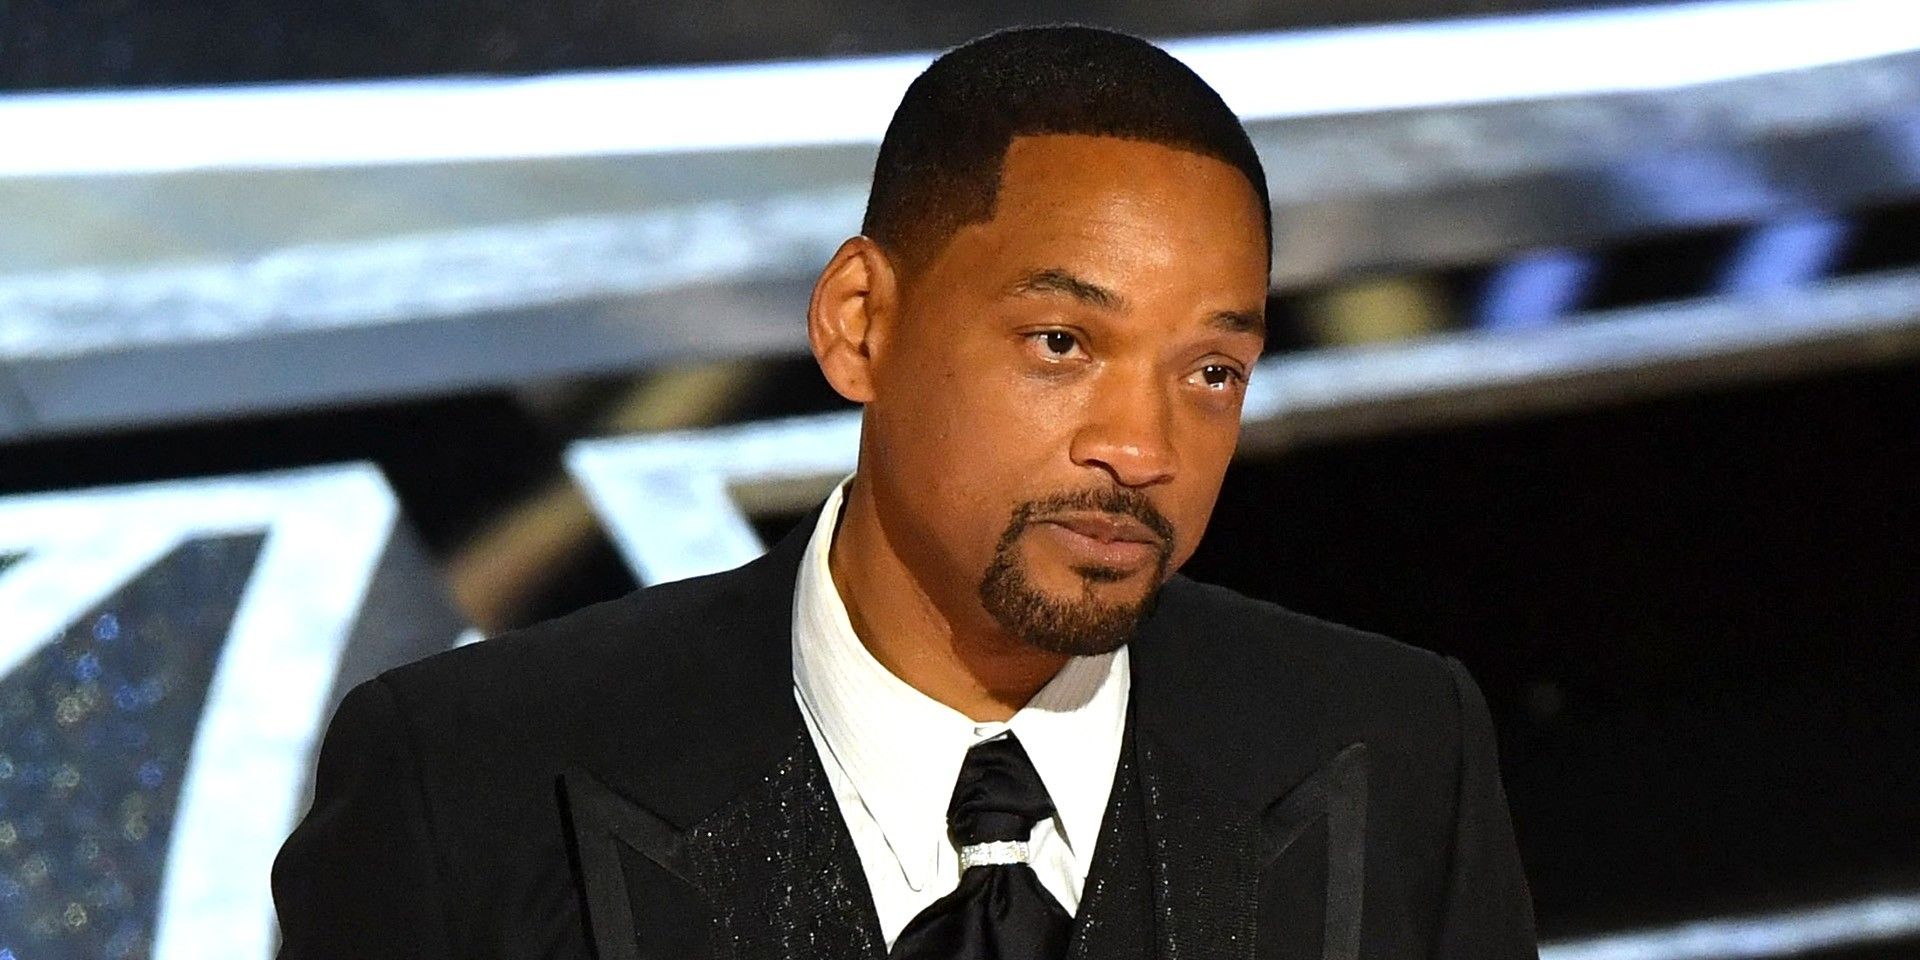 Will Smith during his Acceptance Speech for Best Actor at the Oscars 2022